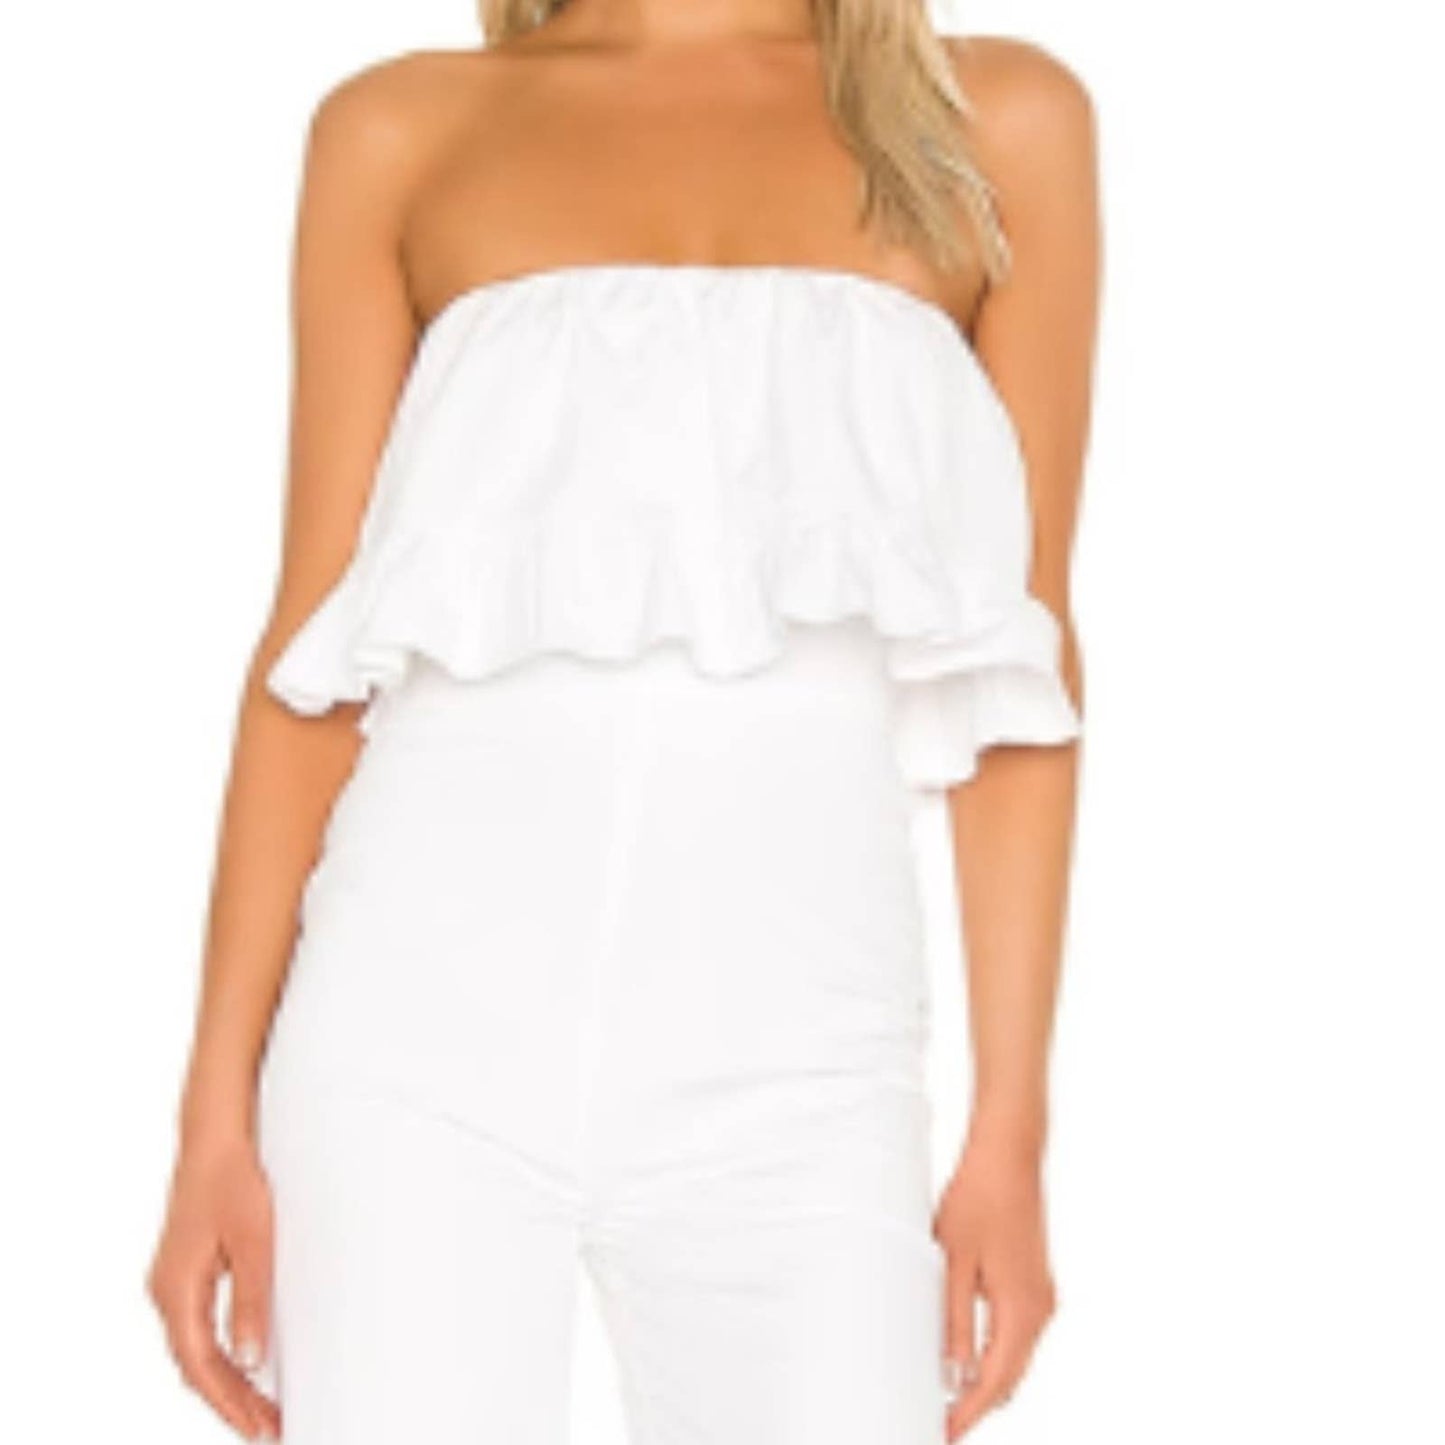 Lovers and Friends Nellie Jumpsuit in White NWT Size Small